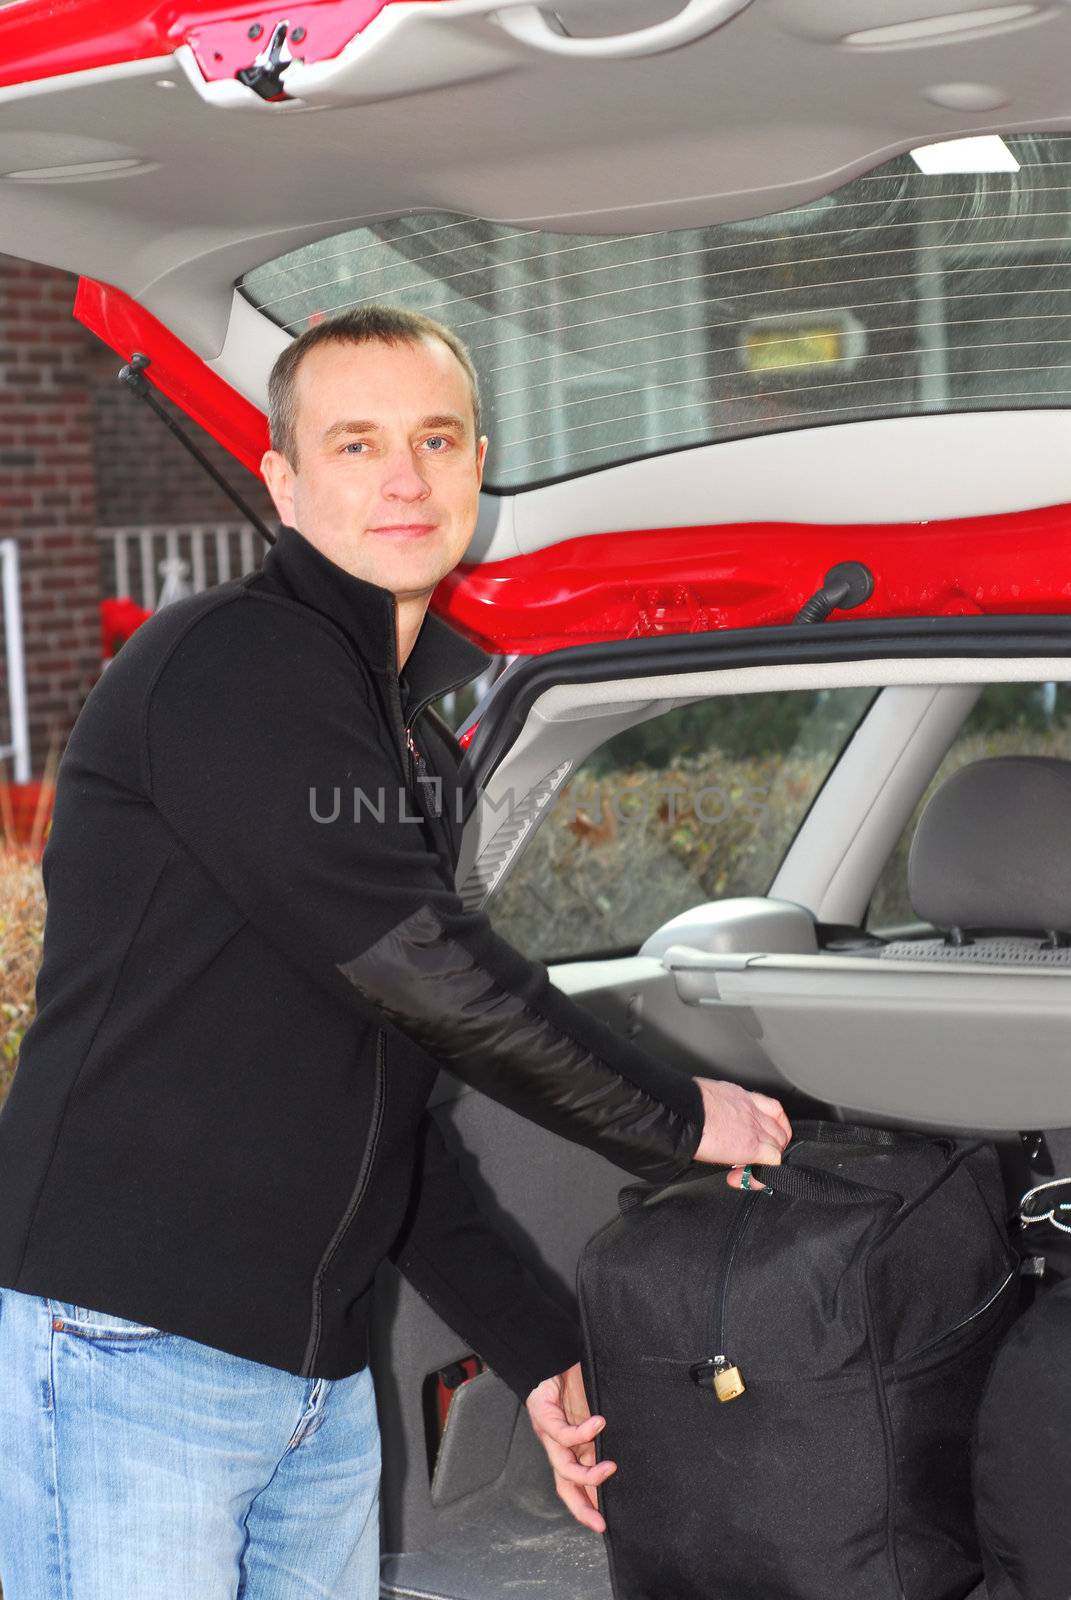 Man loading bags in the trunk of his car